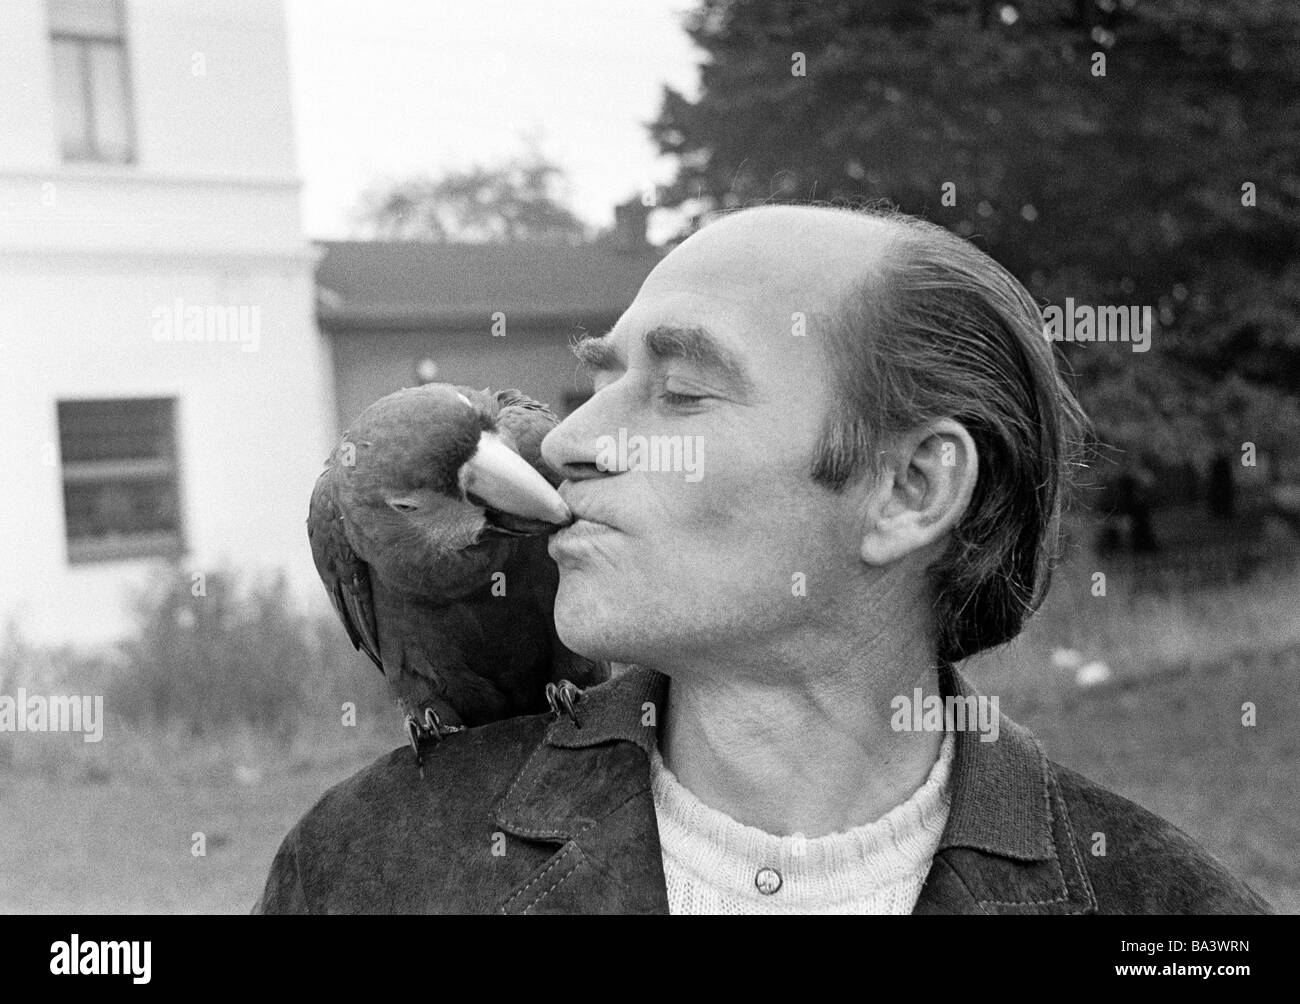 Seventies, black and white photo, human and animal, man will be kissed by a parrot, aged 40 to 50 years, Psittaciformes Stock Photo